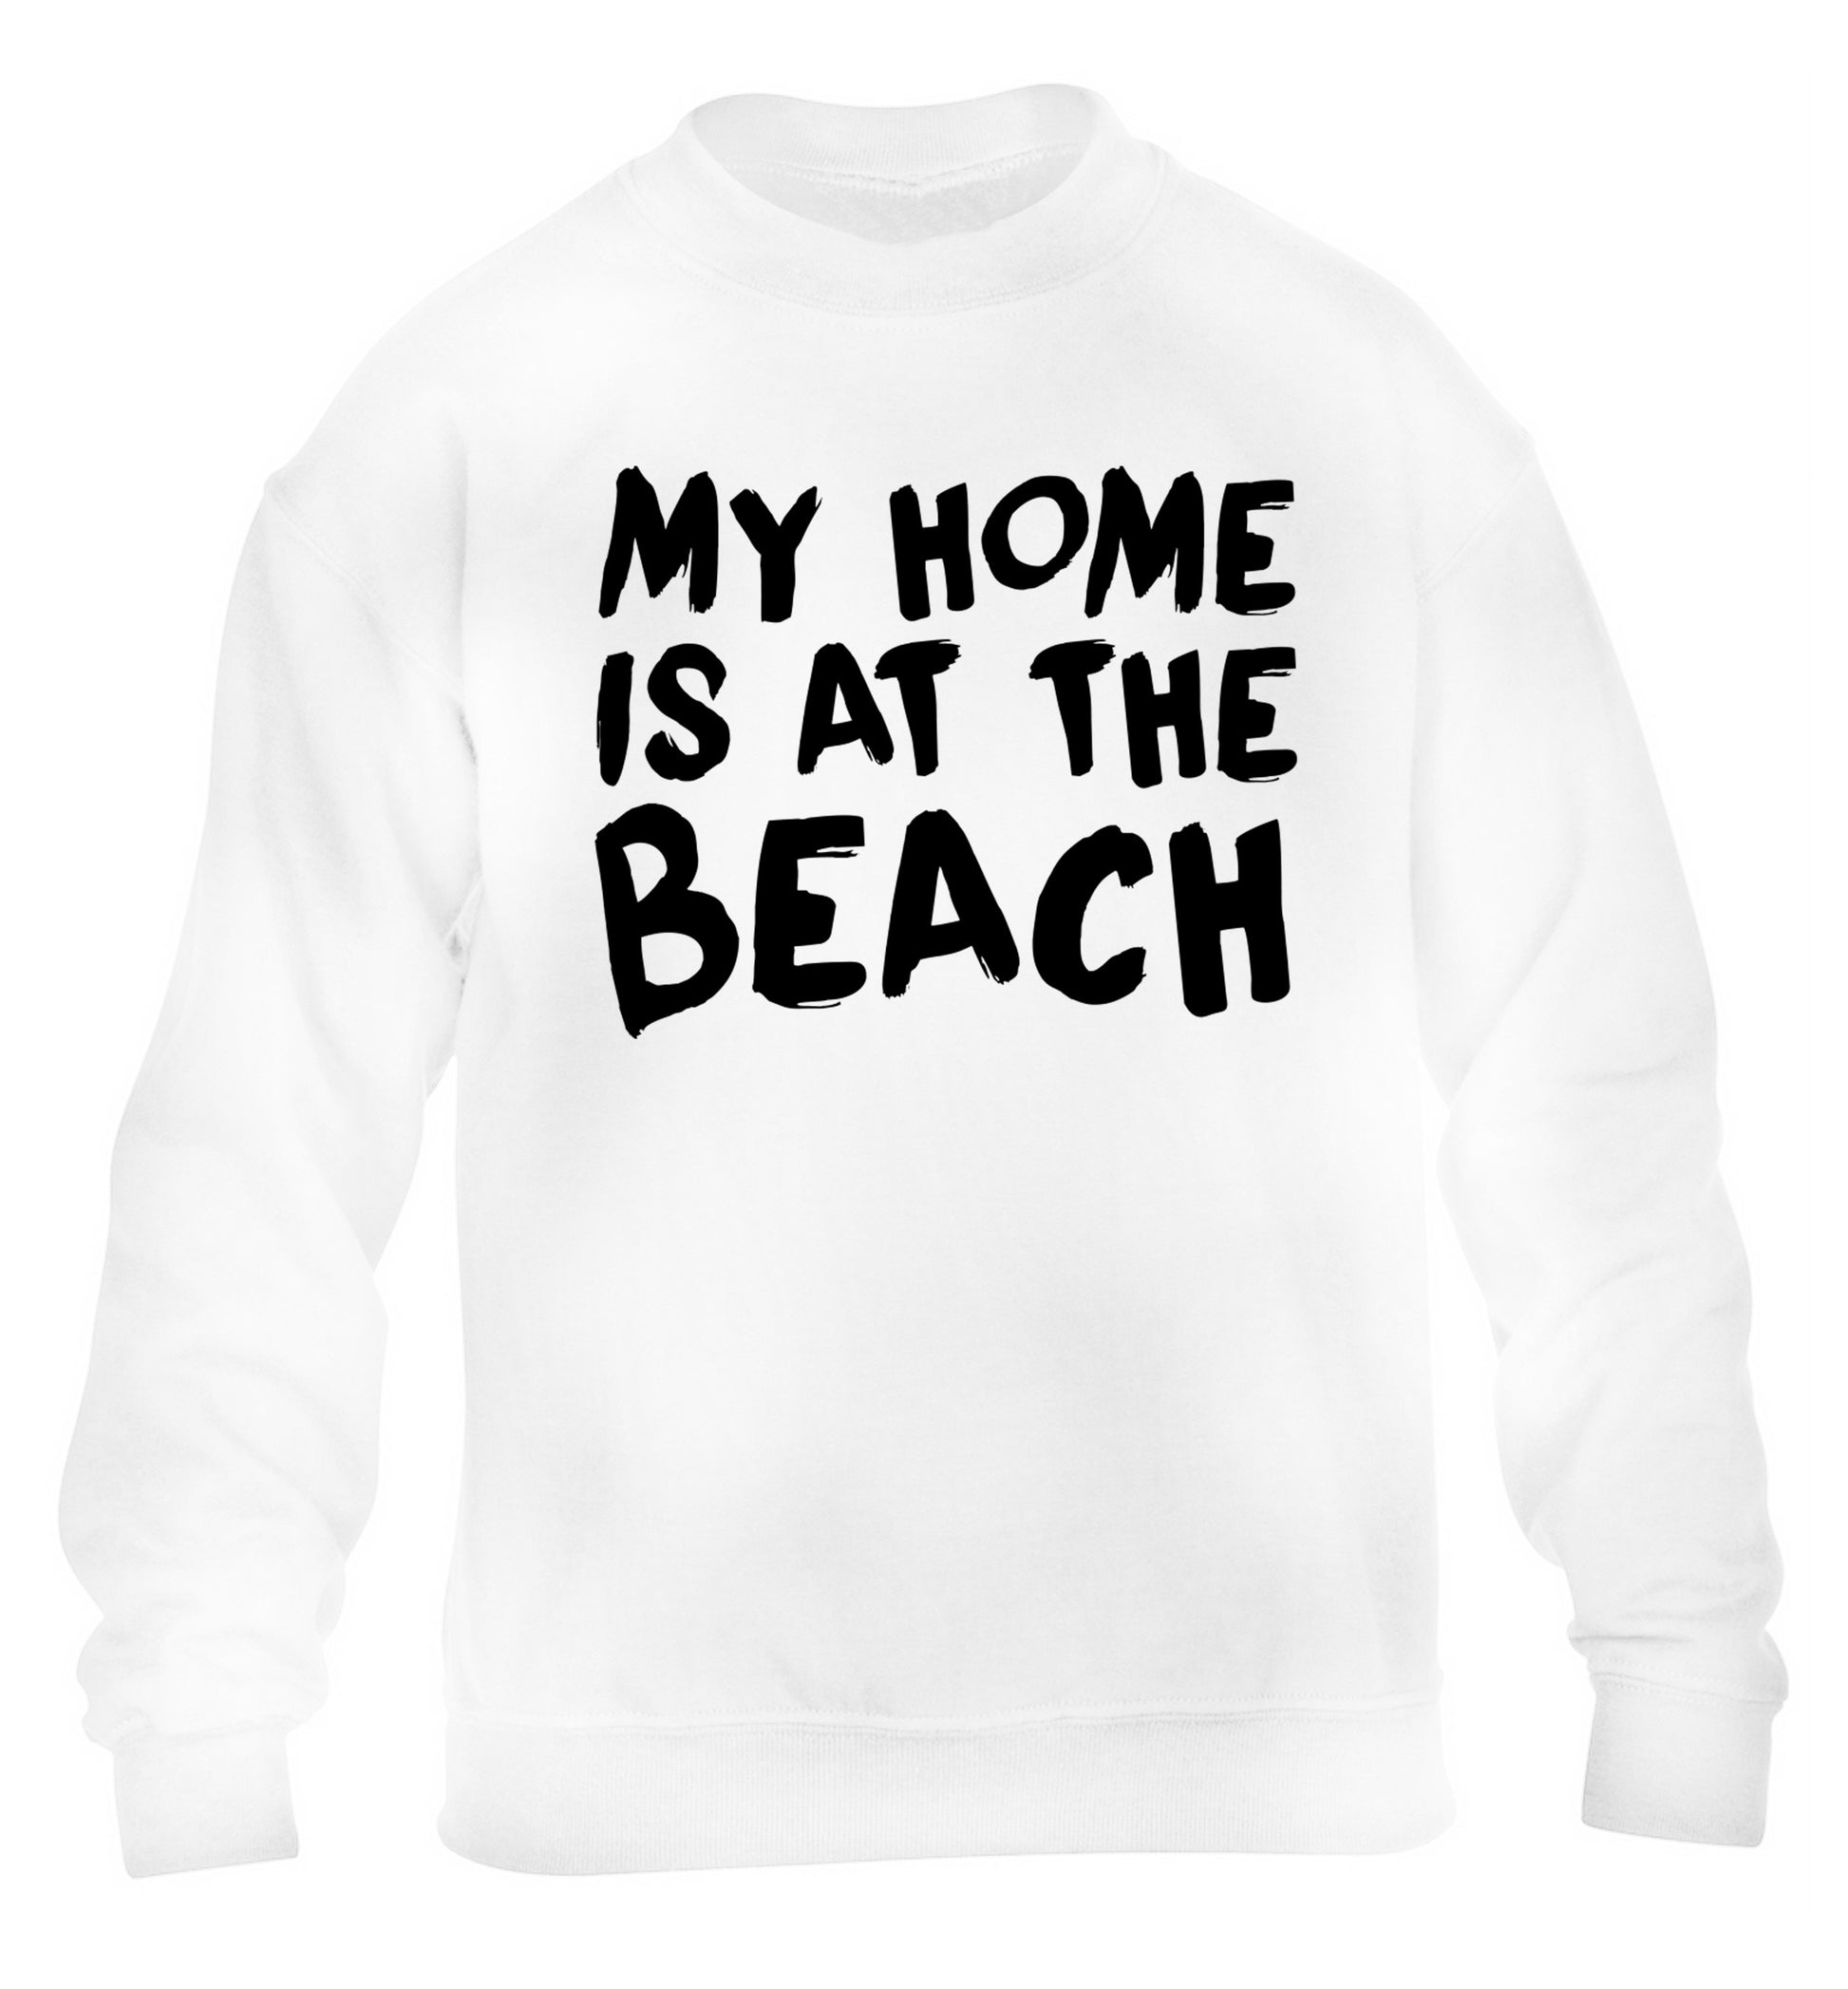 My home is at the beach children's white sweater 12-14 Years